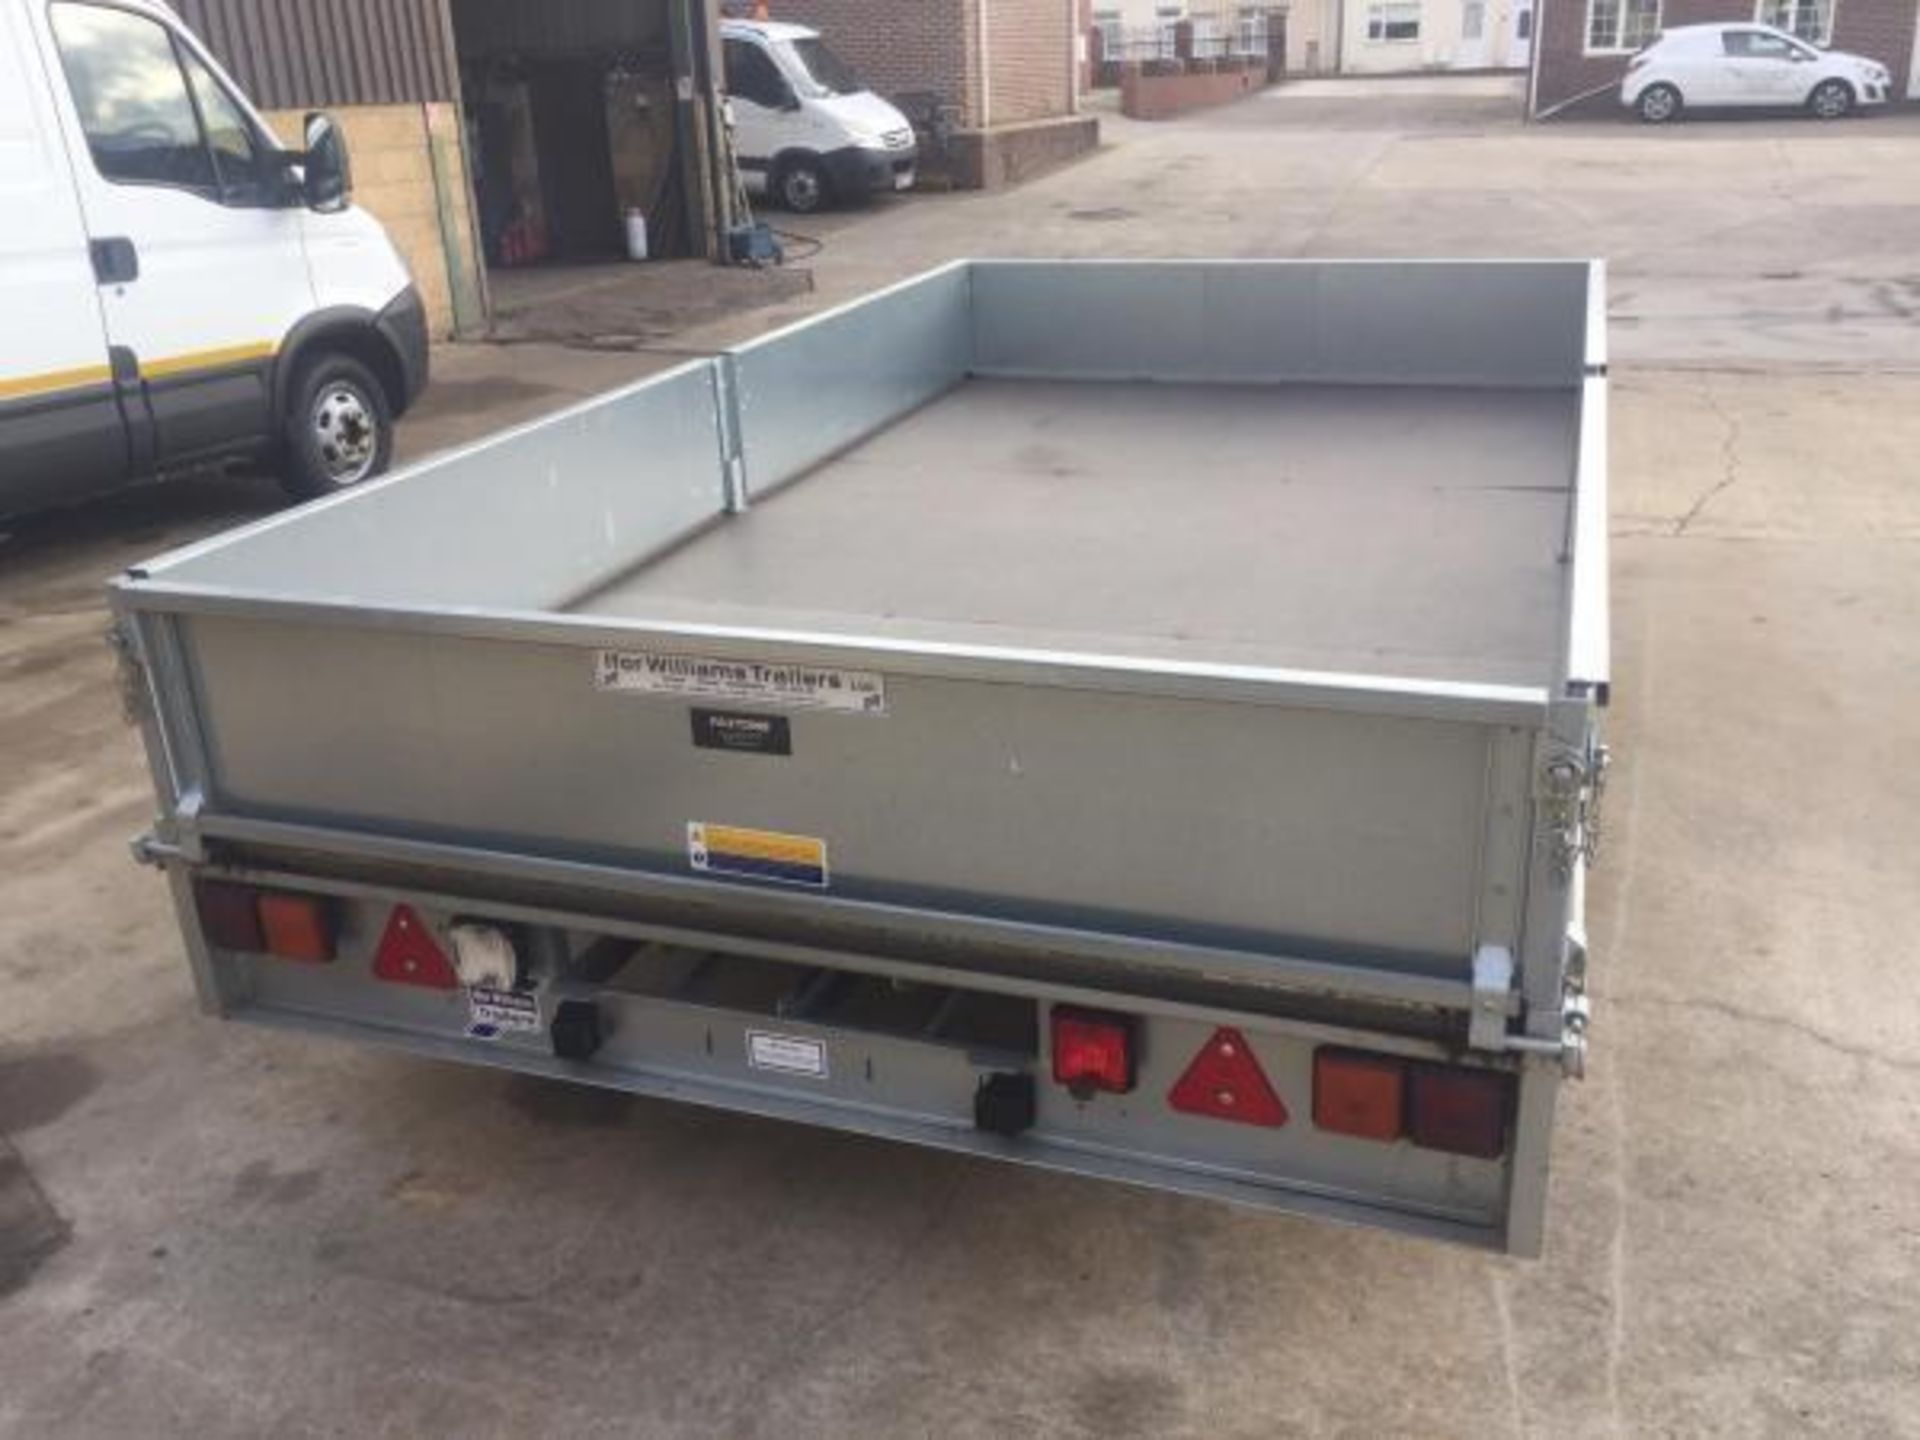 2018 IFOR WILLIAMS LM35 TWIN AXLE TRAILER NEW UNUSED WITH ALL PAPER WORK AND COC 2 KEYS *PLUS VAT* - Image 3 of 3